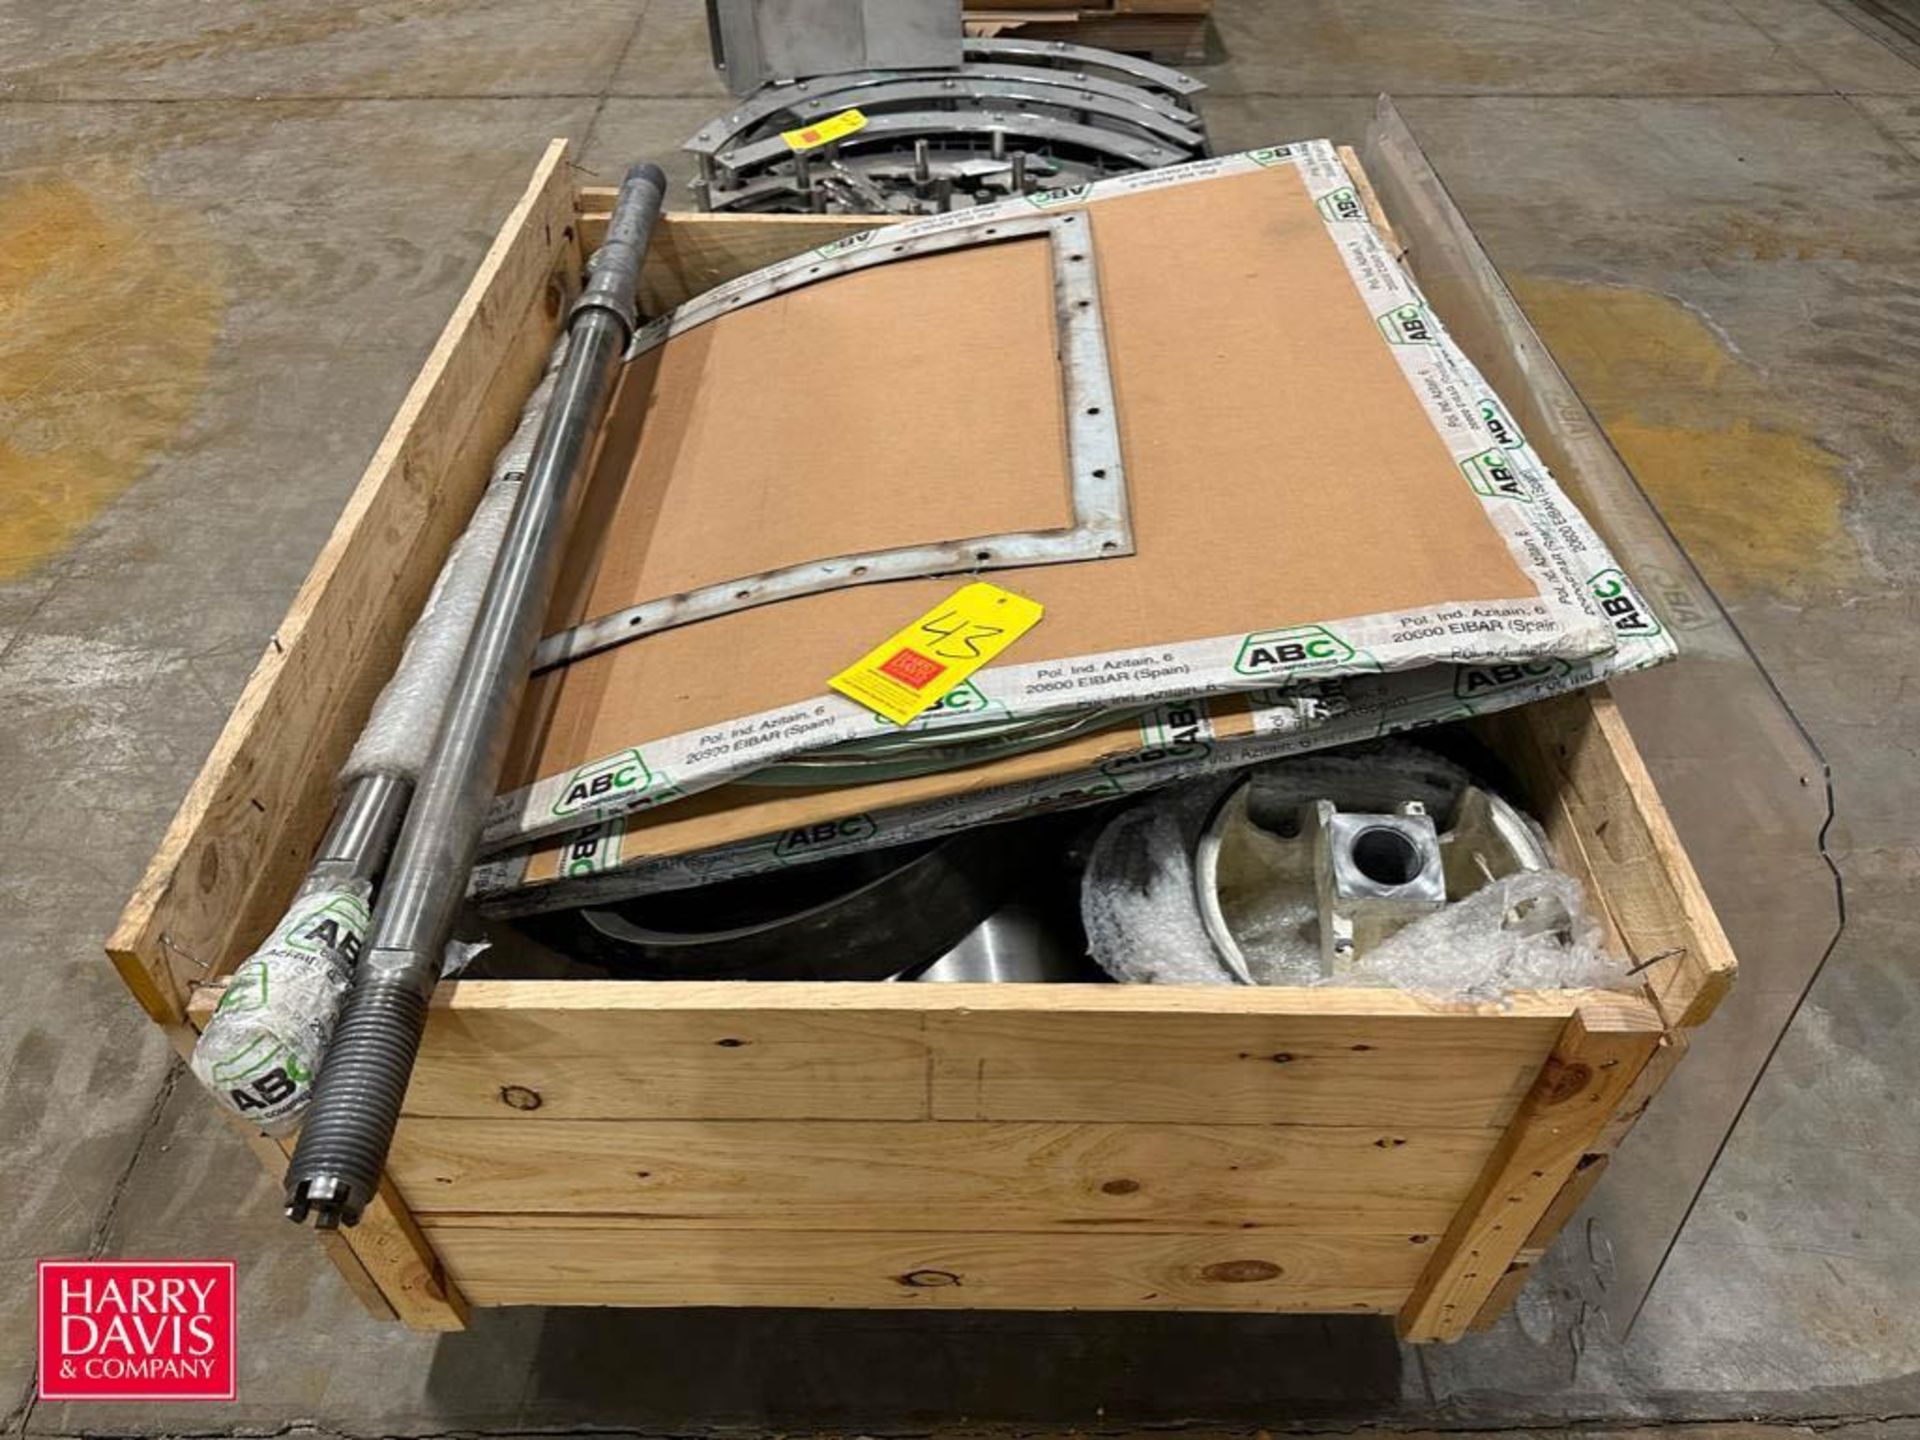 NEW Assorted ABC Parts, Including: Gaskets, Drive Cylinders and Cables - Rigging Fee: $100